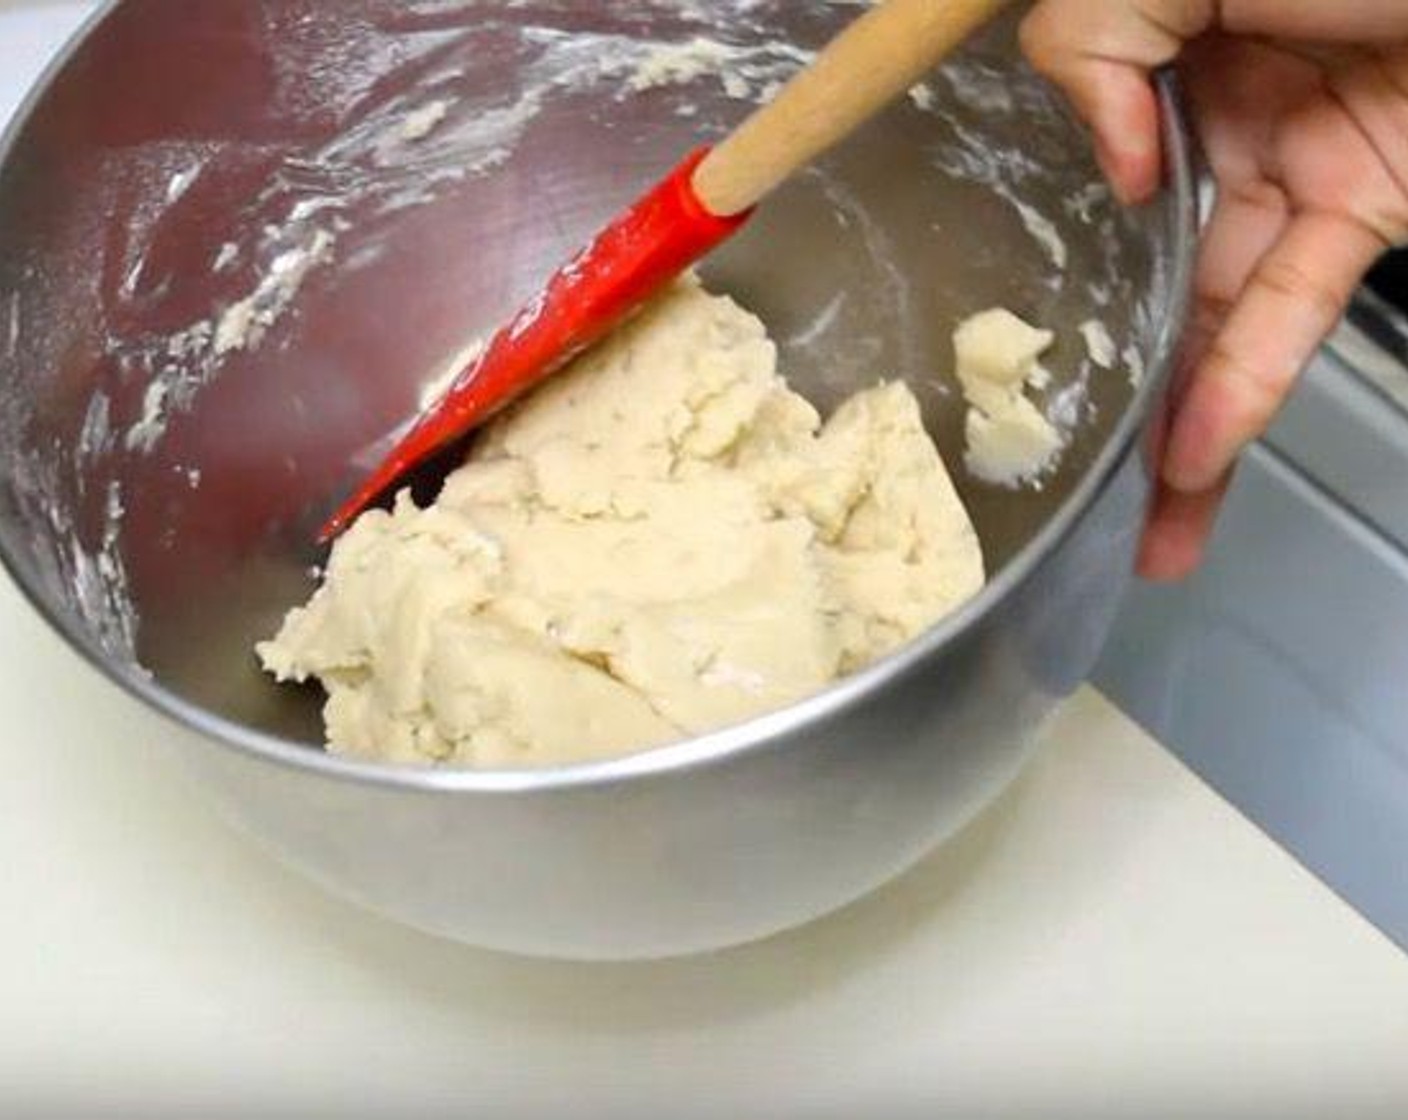 step 1 In the bowl of a stand mixer, add Butter (1/2 cup) and Granulated Sugar (1/4 cup). Mix until combined. Slowly add in All-Purpose Flour (1 cup) and Salt (1/4 tsp), continuing to mix as you do so, until the mixture comes together as a dough.